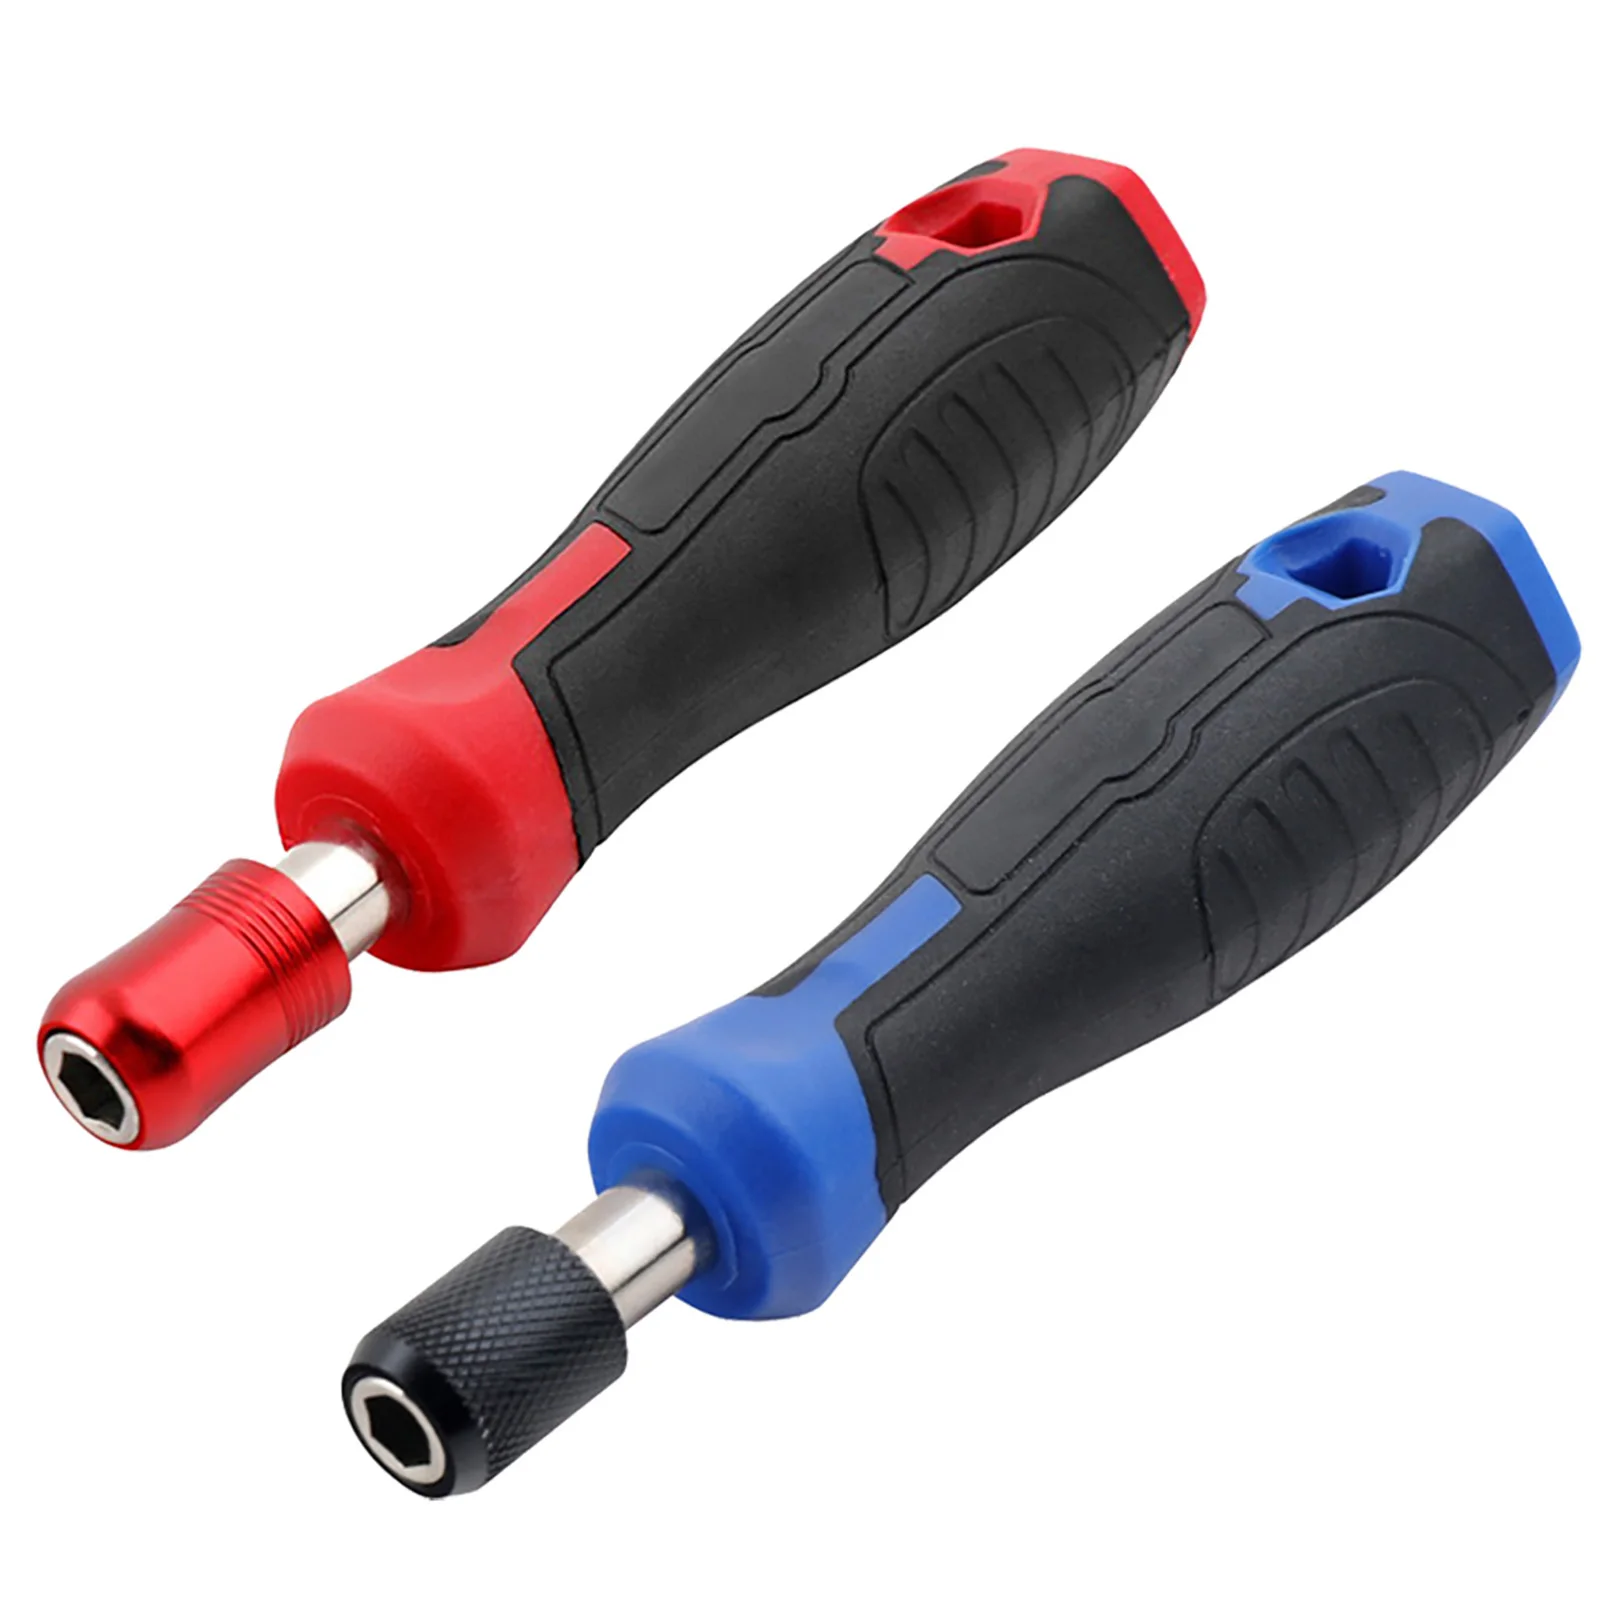 

2Pcs 1/4In Hex Screwdriver Handle Magnetic Screw Driver Bits Holder Self-Locking Adapter For Screwdriver Bits Socket Wrench Tool